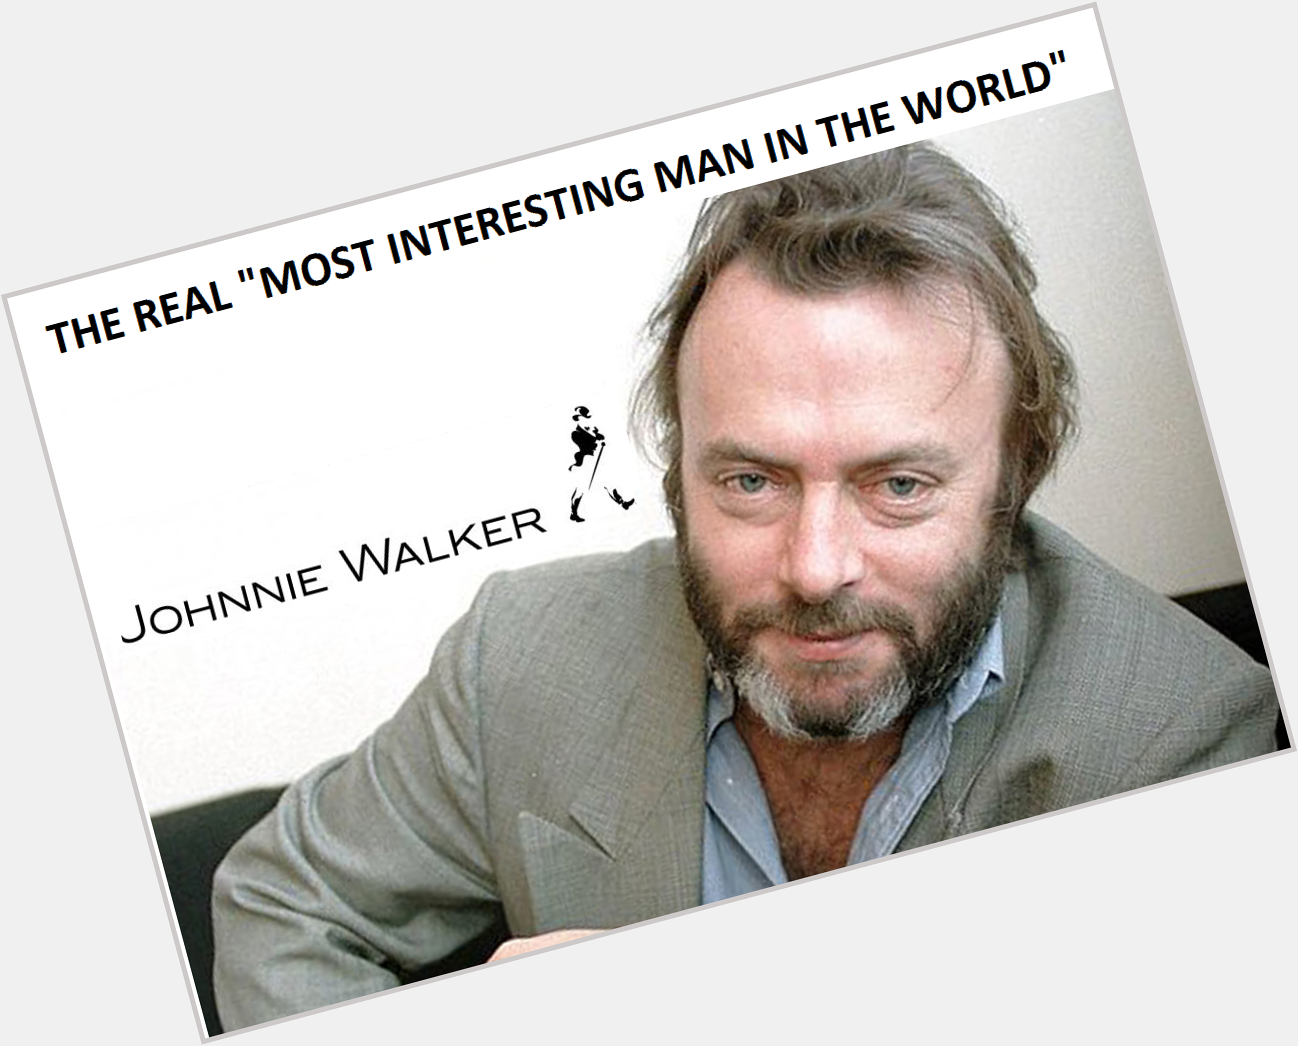   Made this meme in honor of my hero! HAPPY BIRTHDAY TO CHRISTOPHER HITCHENS! 